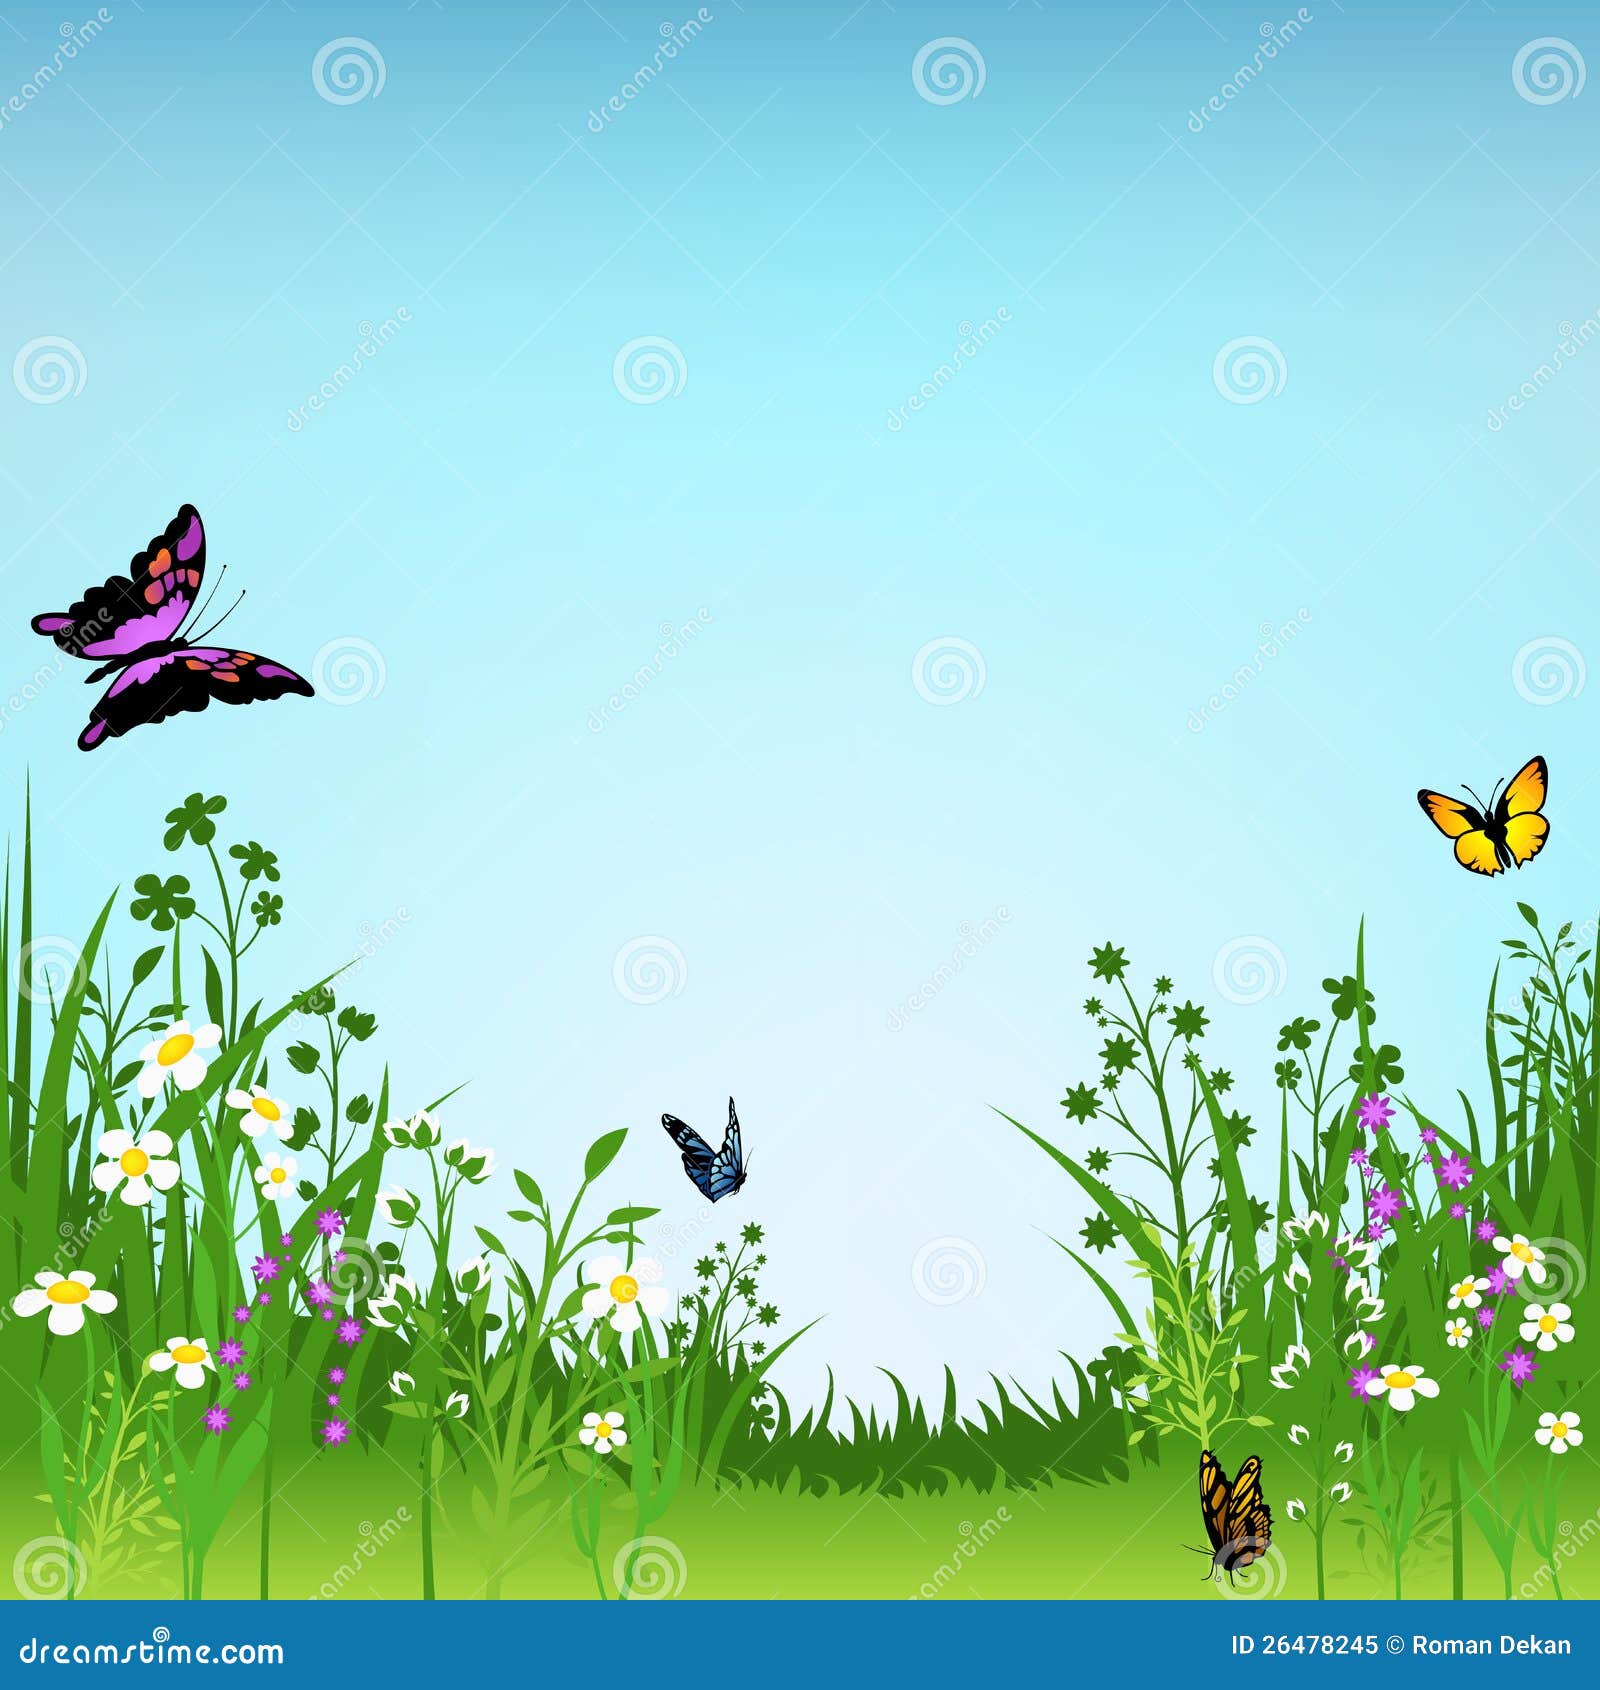 clipart meadow flowers - photo #14